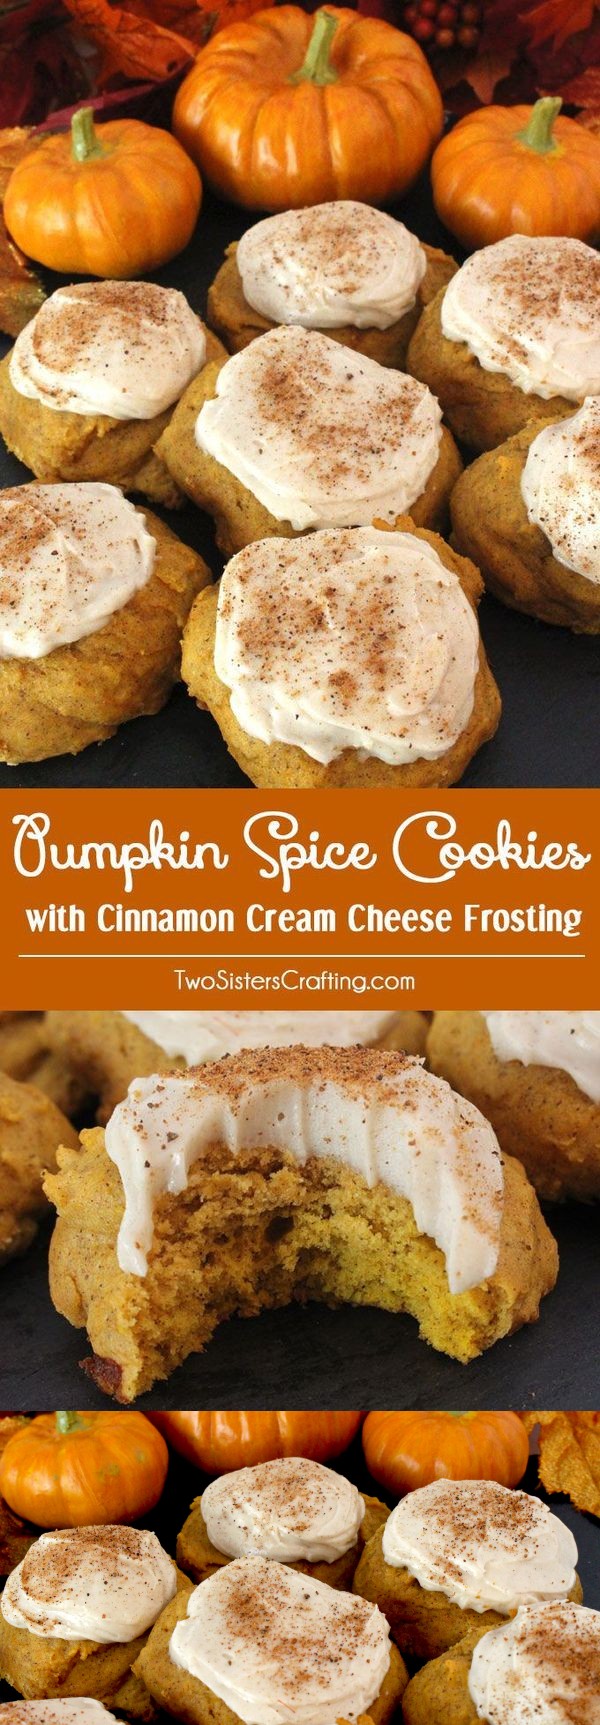 Pumpkin Spice Cookies with Cinnamon Cream Cheese Frosting